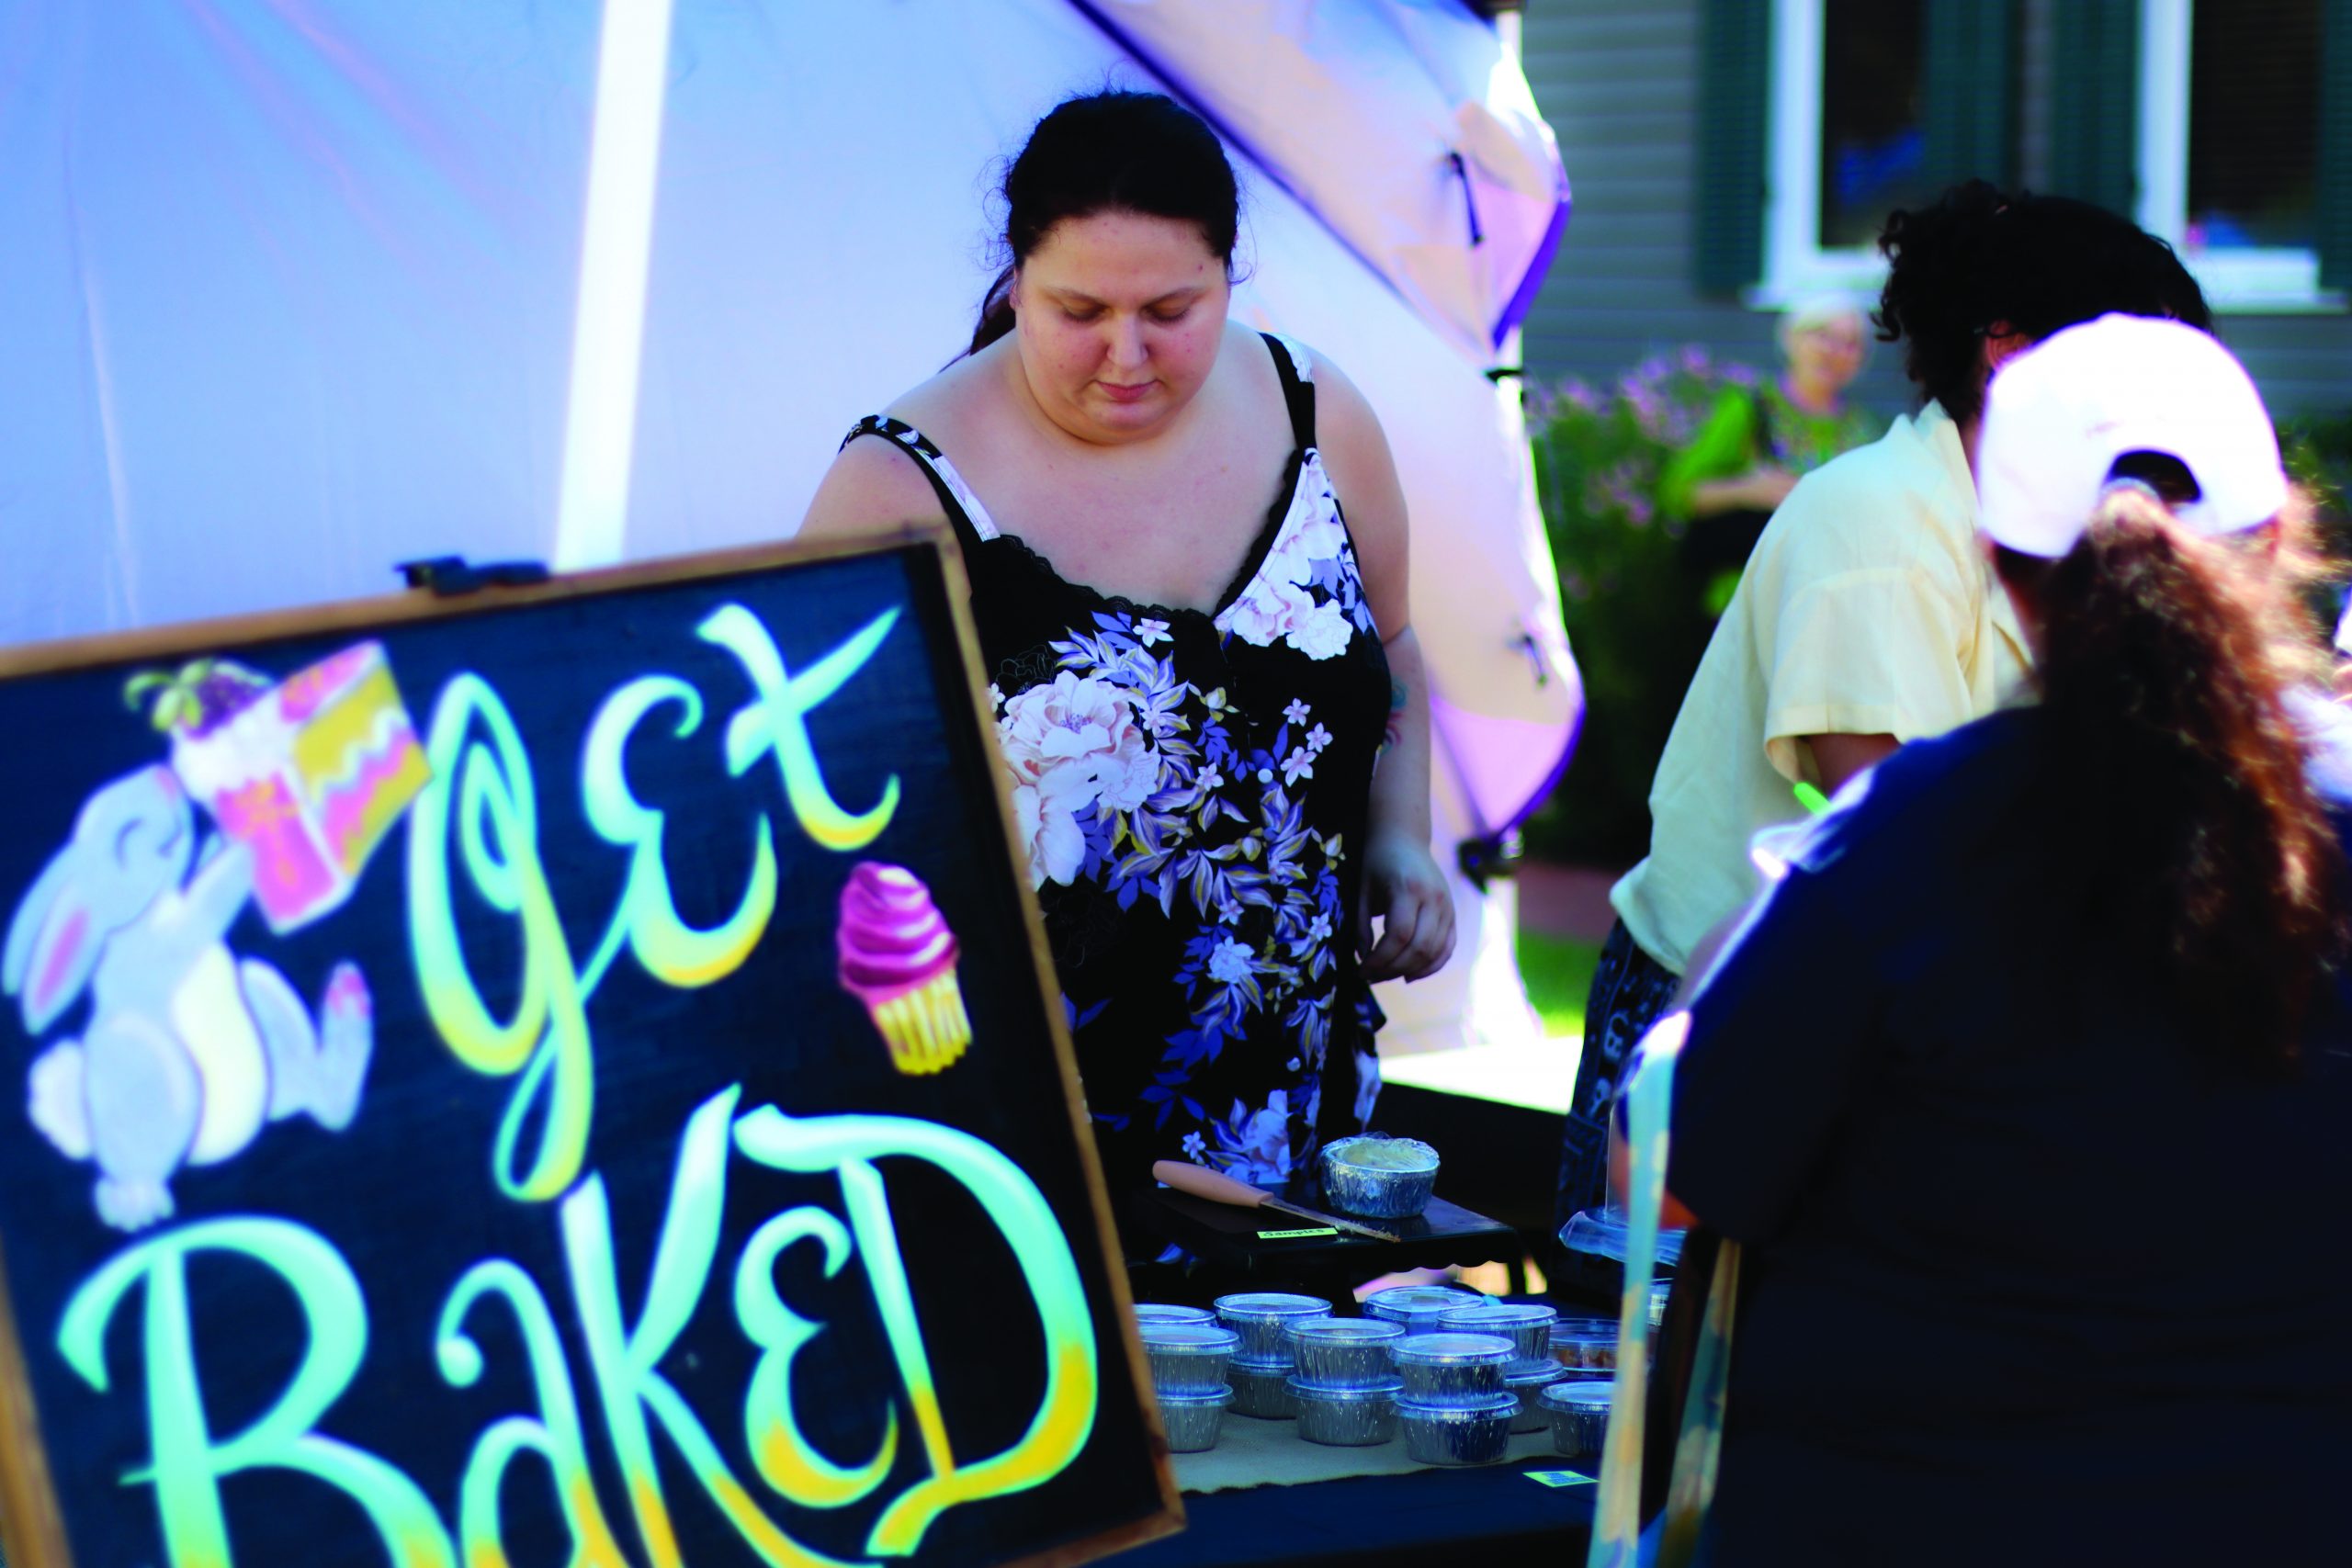 Heritage Park Market Days offers new venue for local businesses